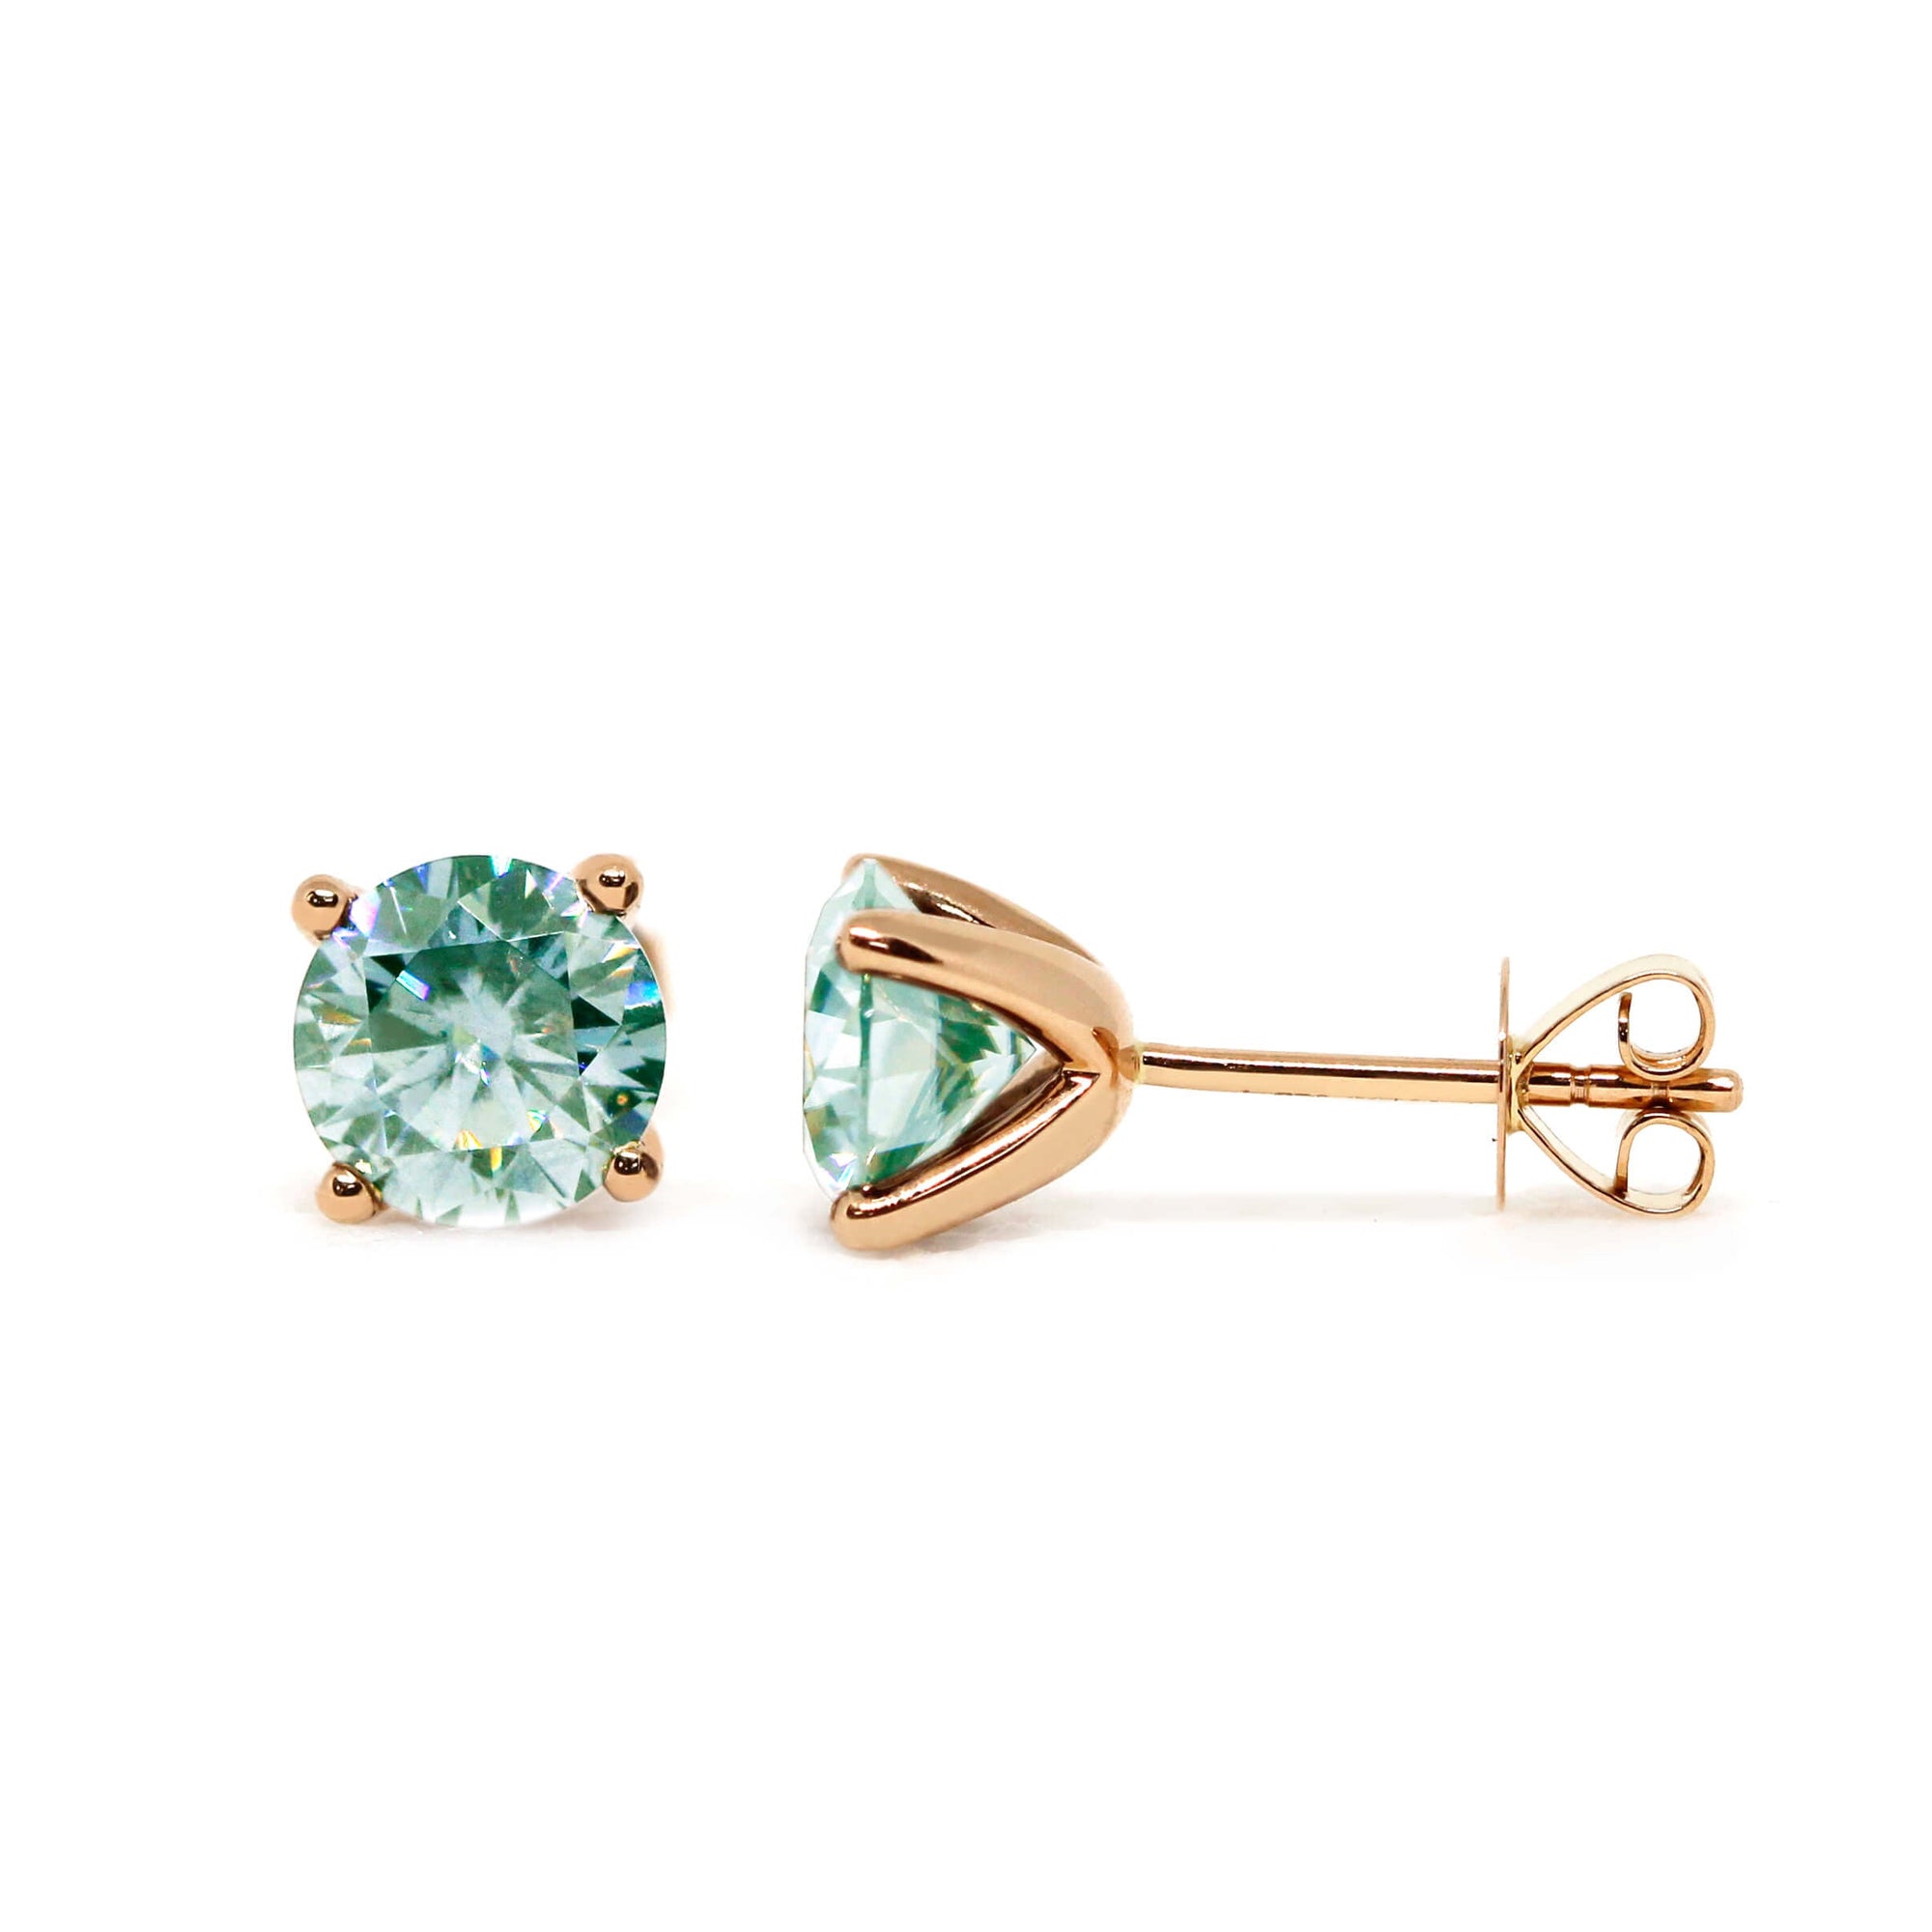 Round Mint Green Moissanite Solitaire in 4 Prong Setting Stud Earrings in 18K Rose gold - LeCaine Gems